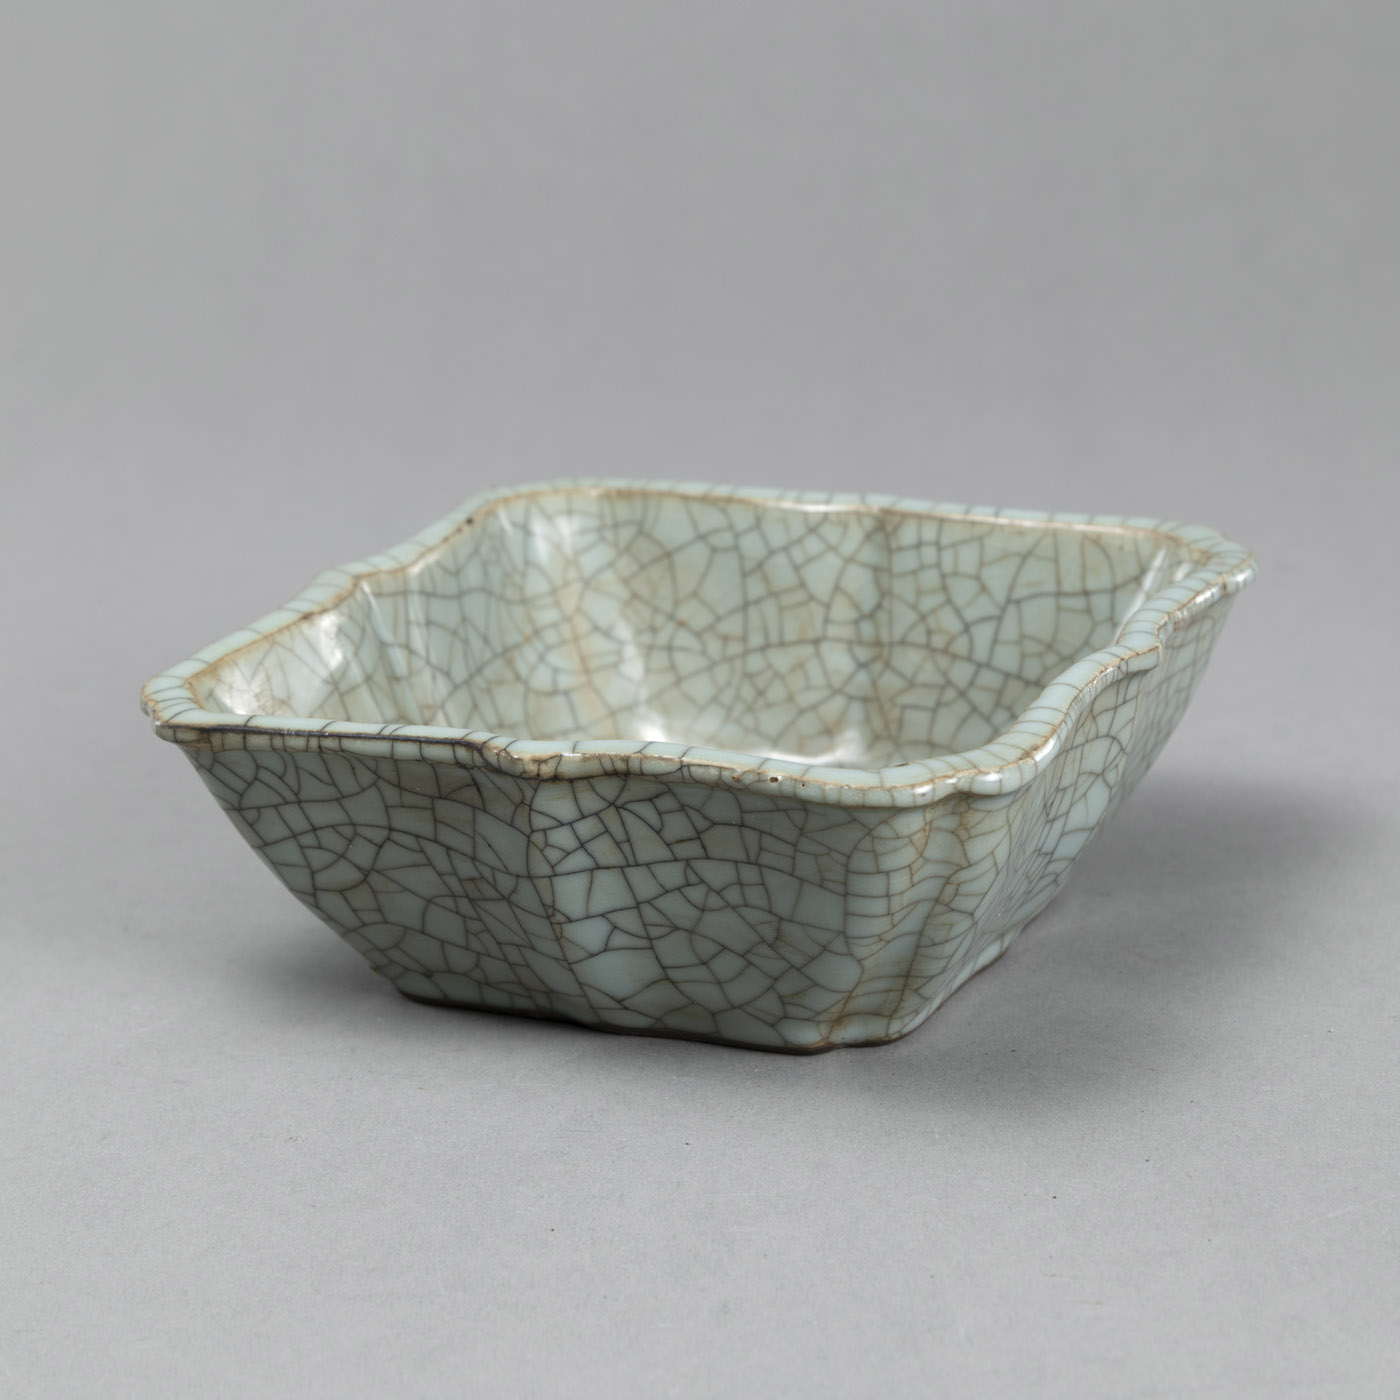 <b>A SQUARE PORCELAIN BOWL WITH FLOWER-SHAPED RIM IN THE GE WARE STYLE</b>